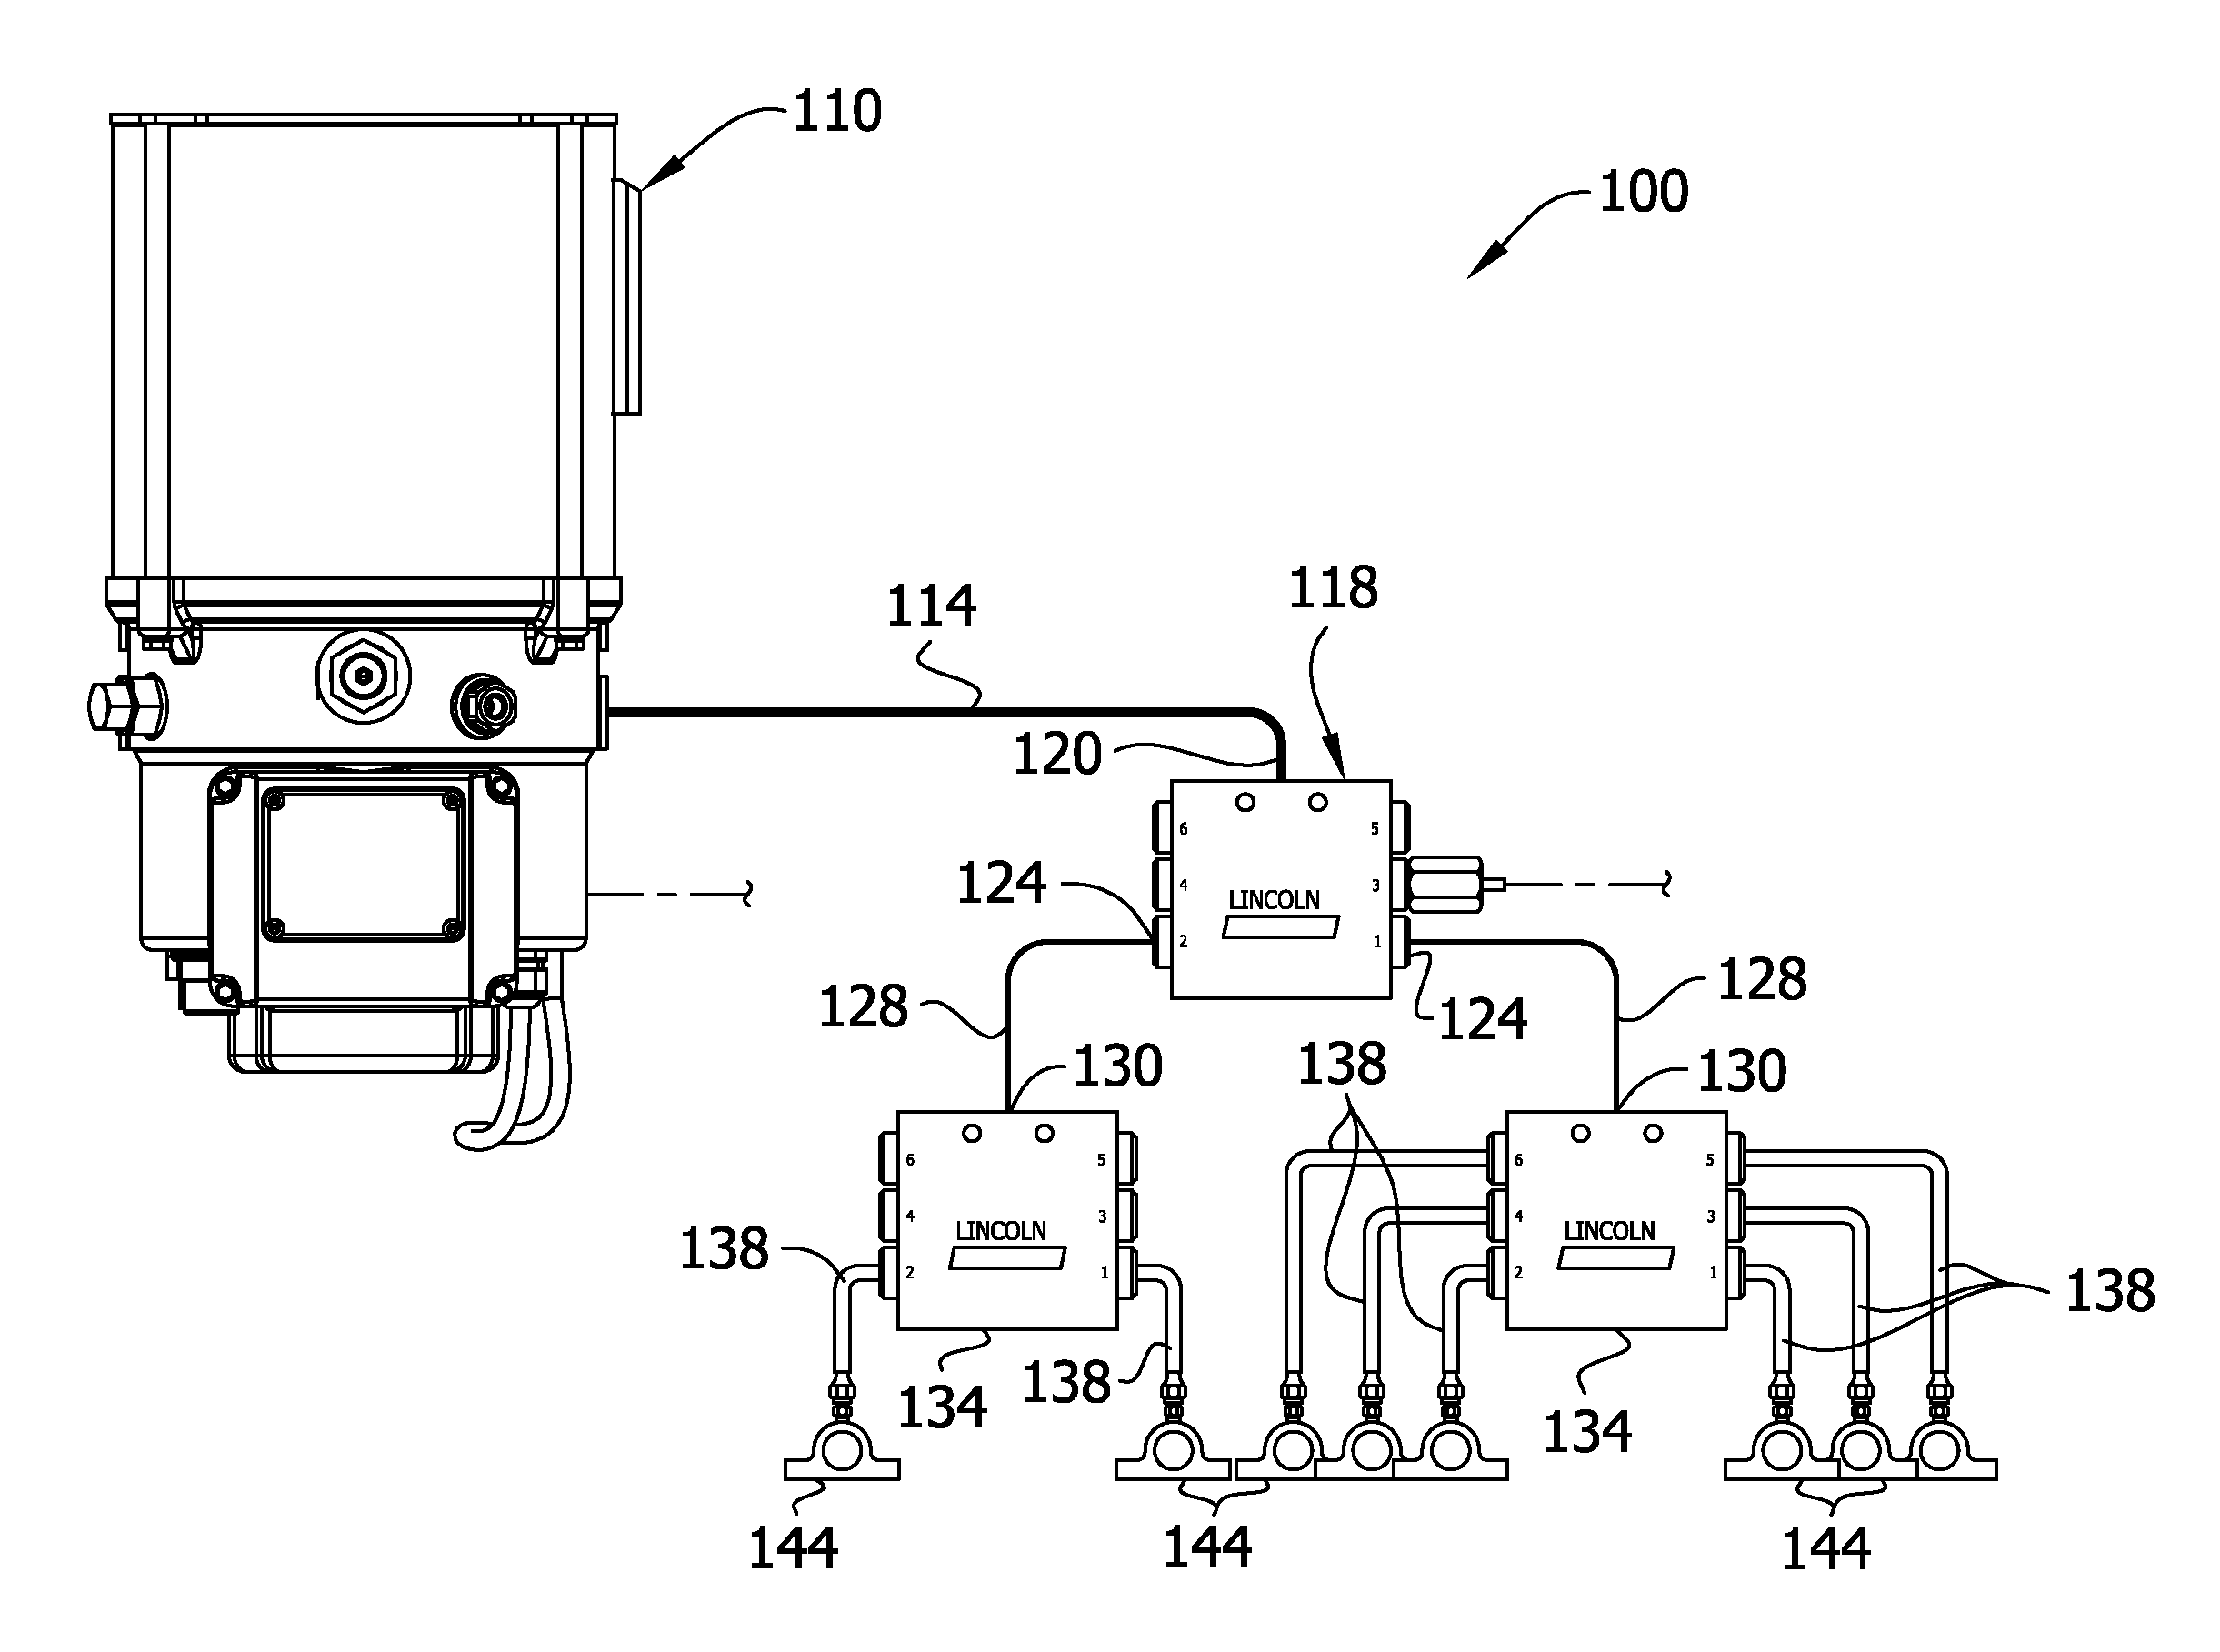 Apparatus and method for controlling a lubriation unit using flow rate feedback